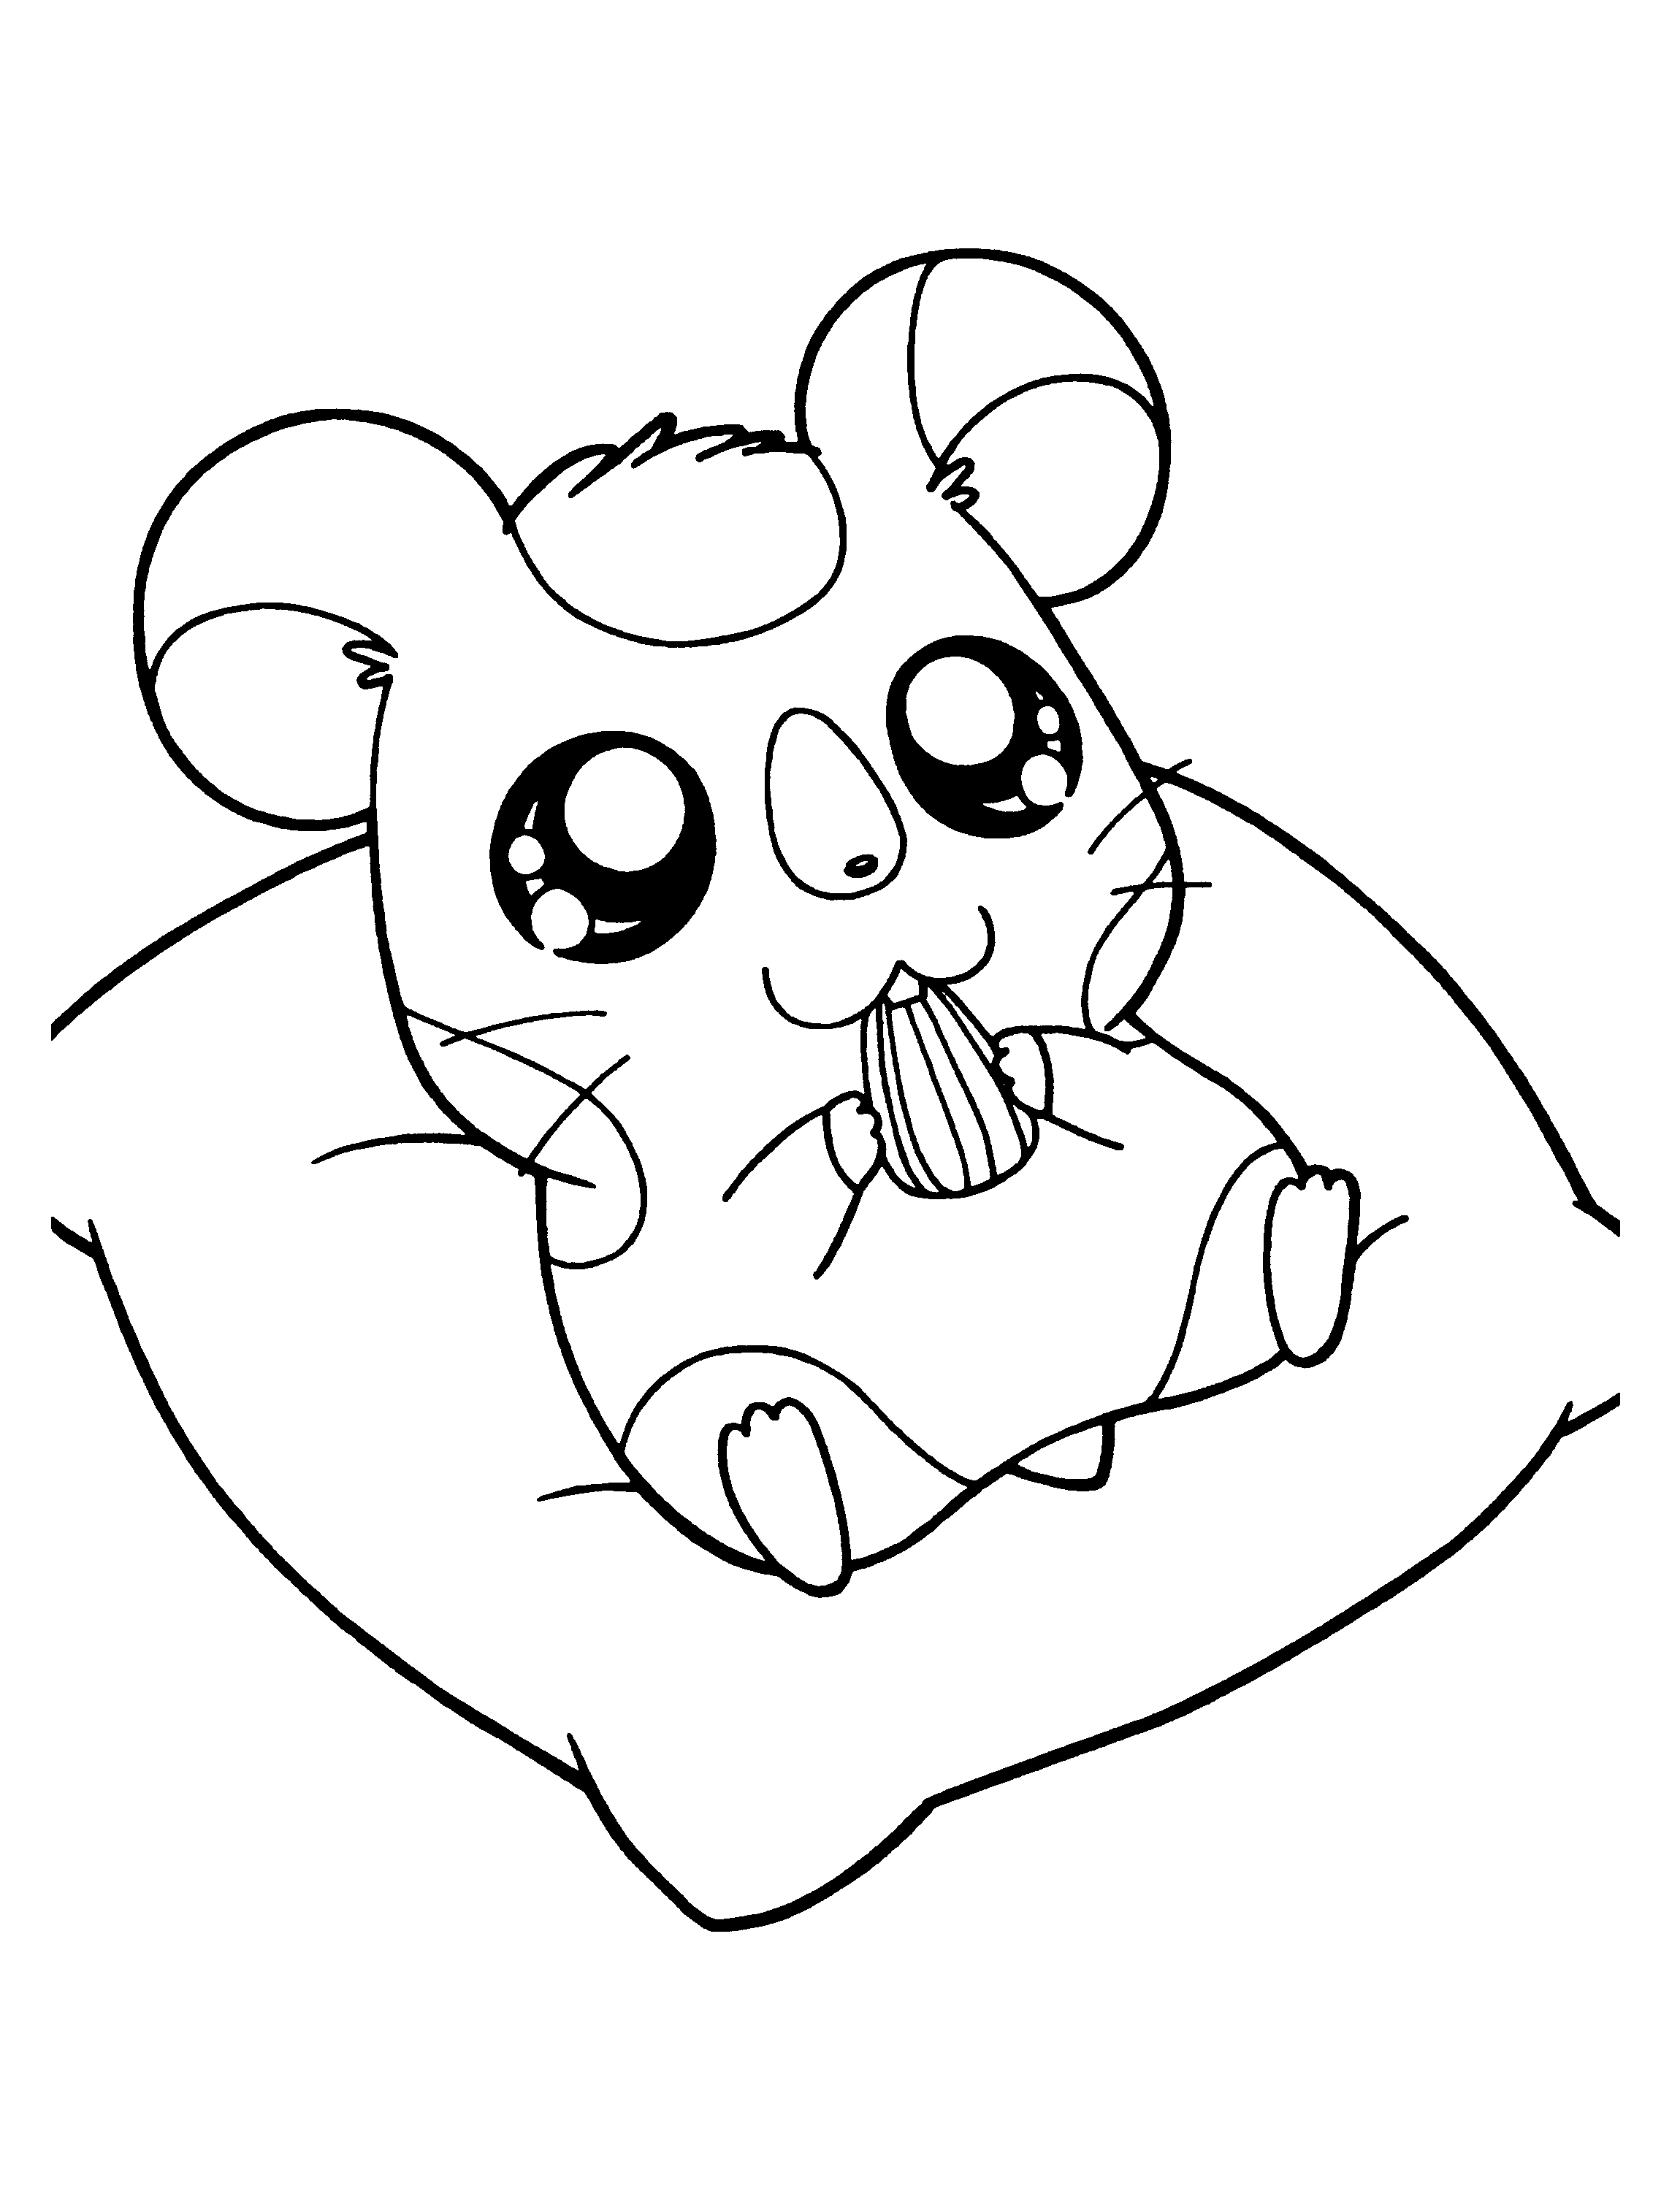 hamster-coloring-pages-to-print-coloring-pages